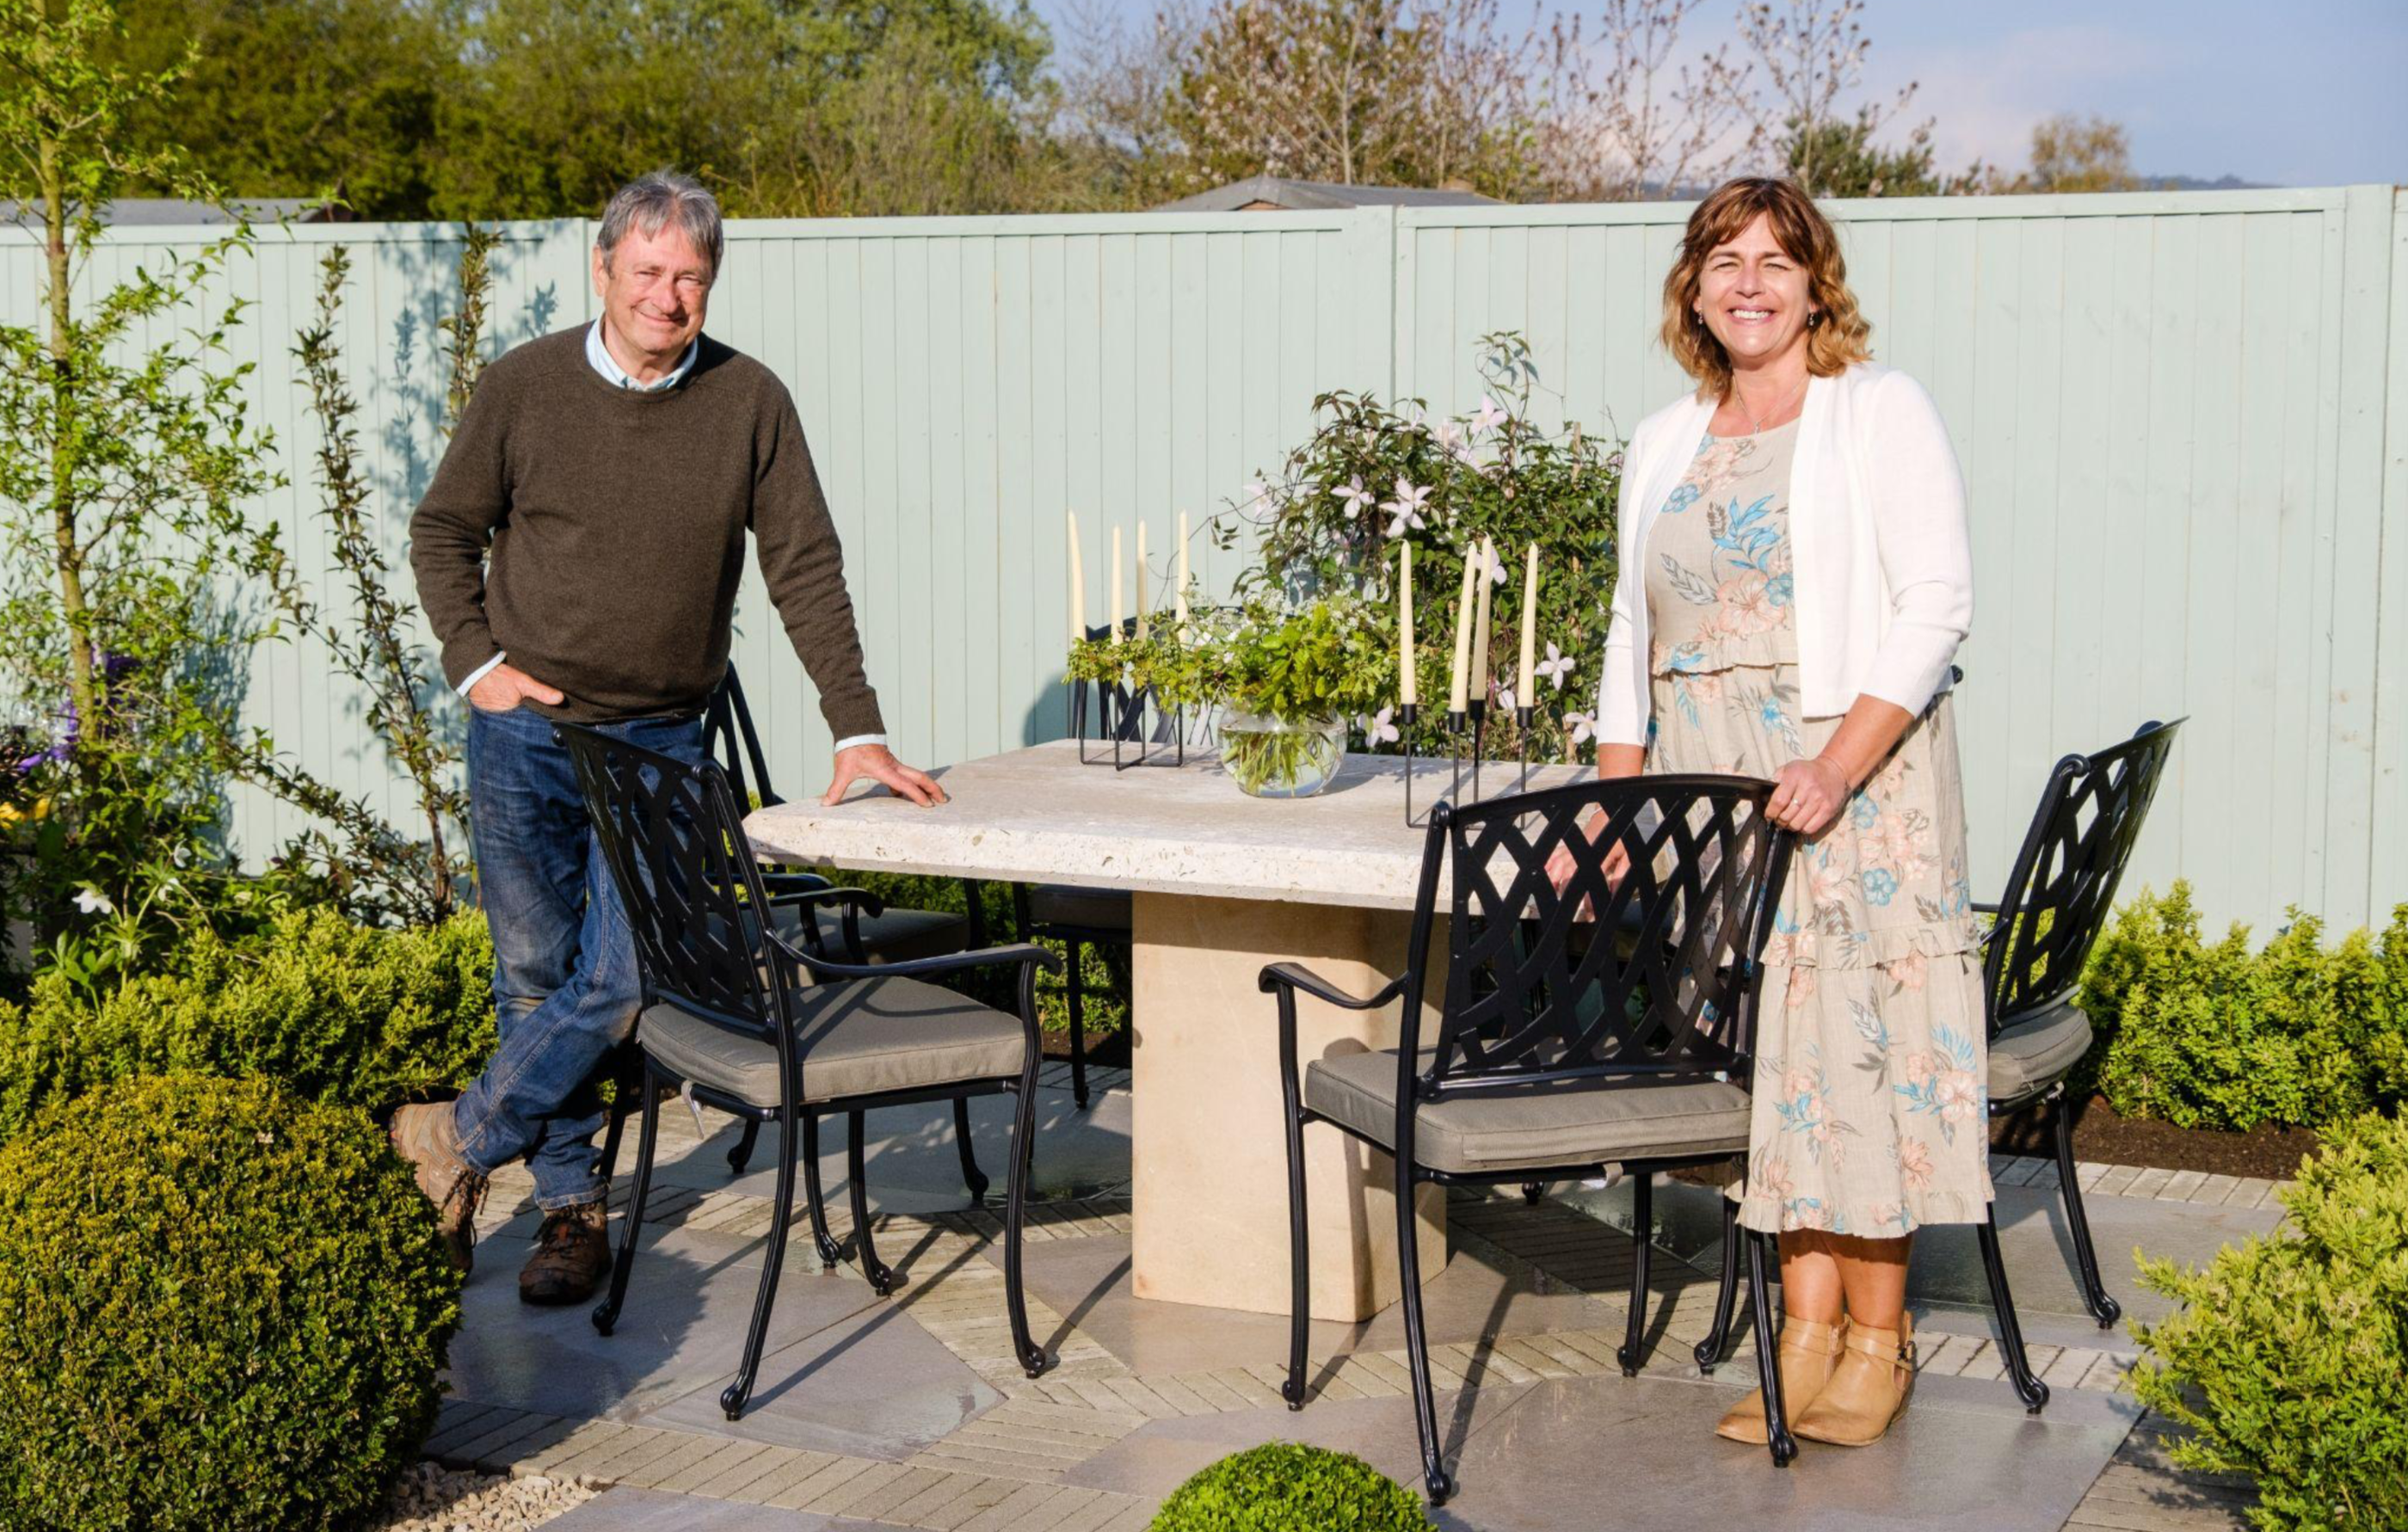 Alan Titchmarsh from ITV's Love Your Garden with homeowner Mel